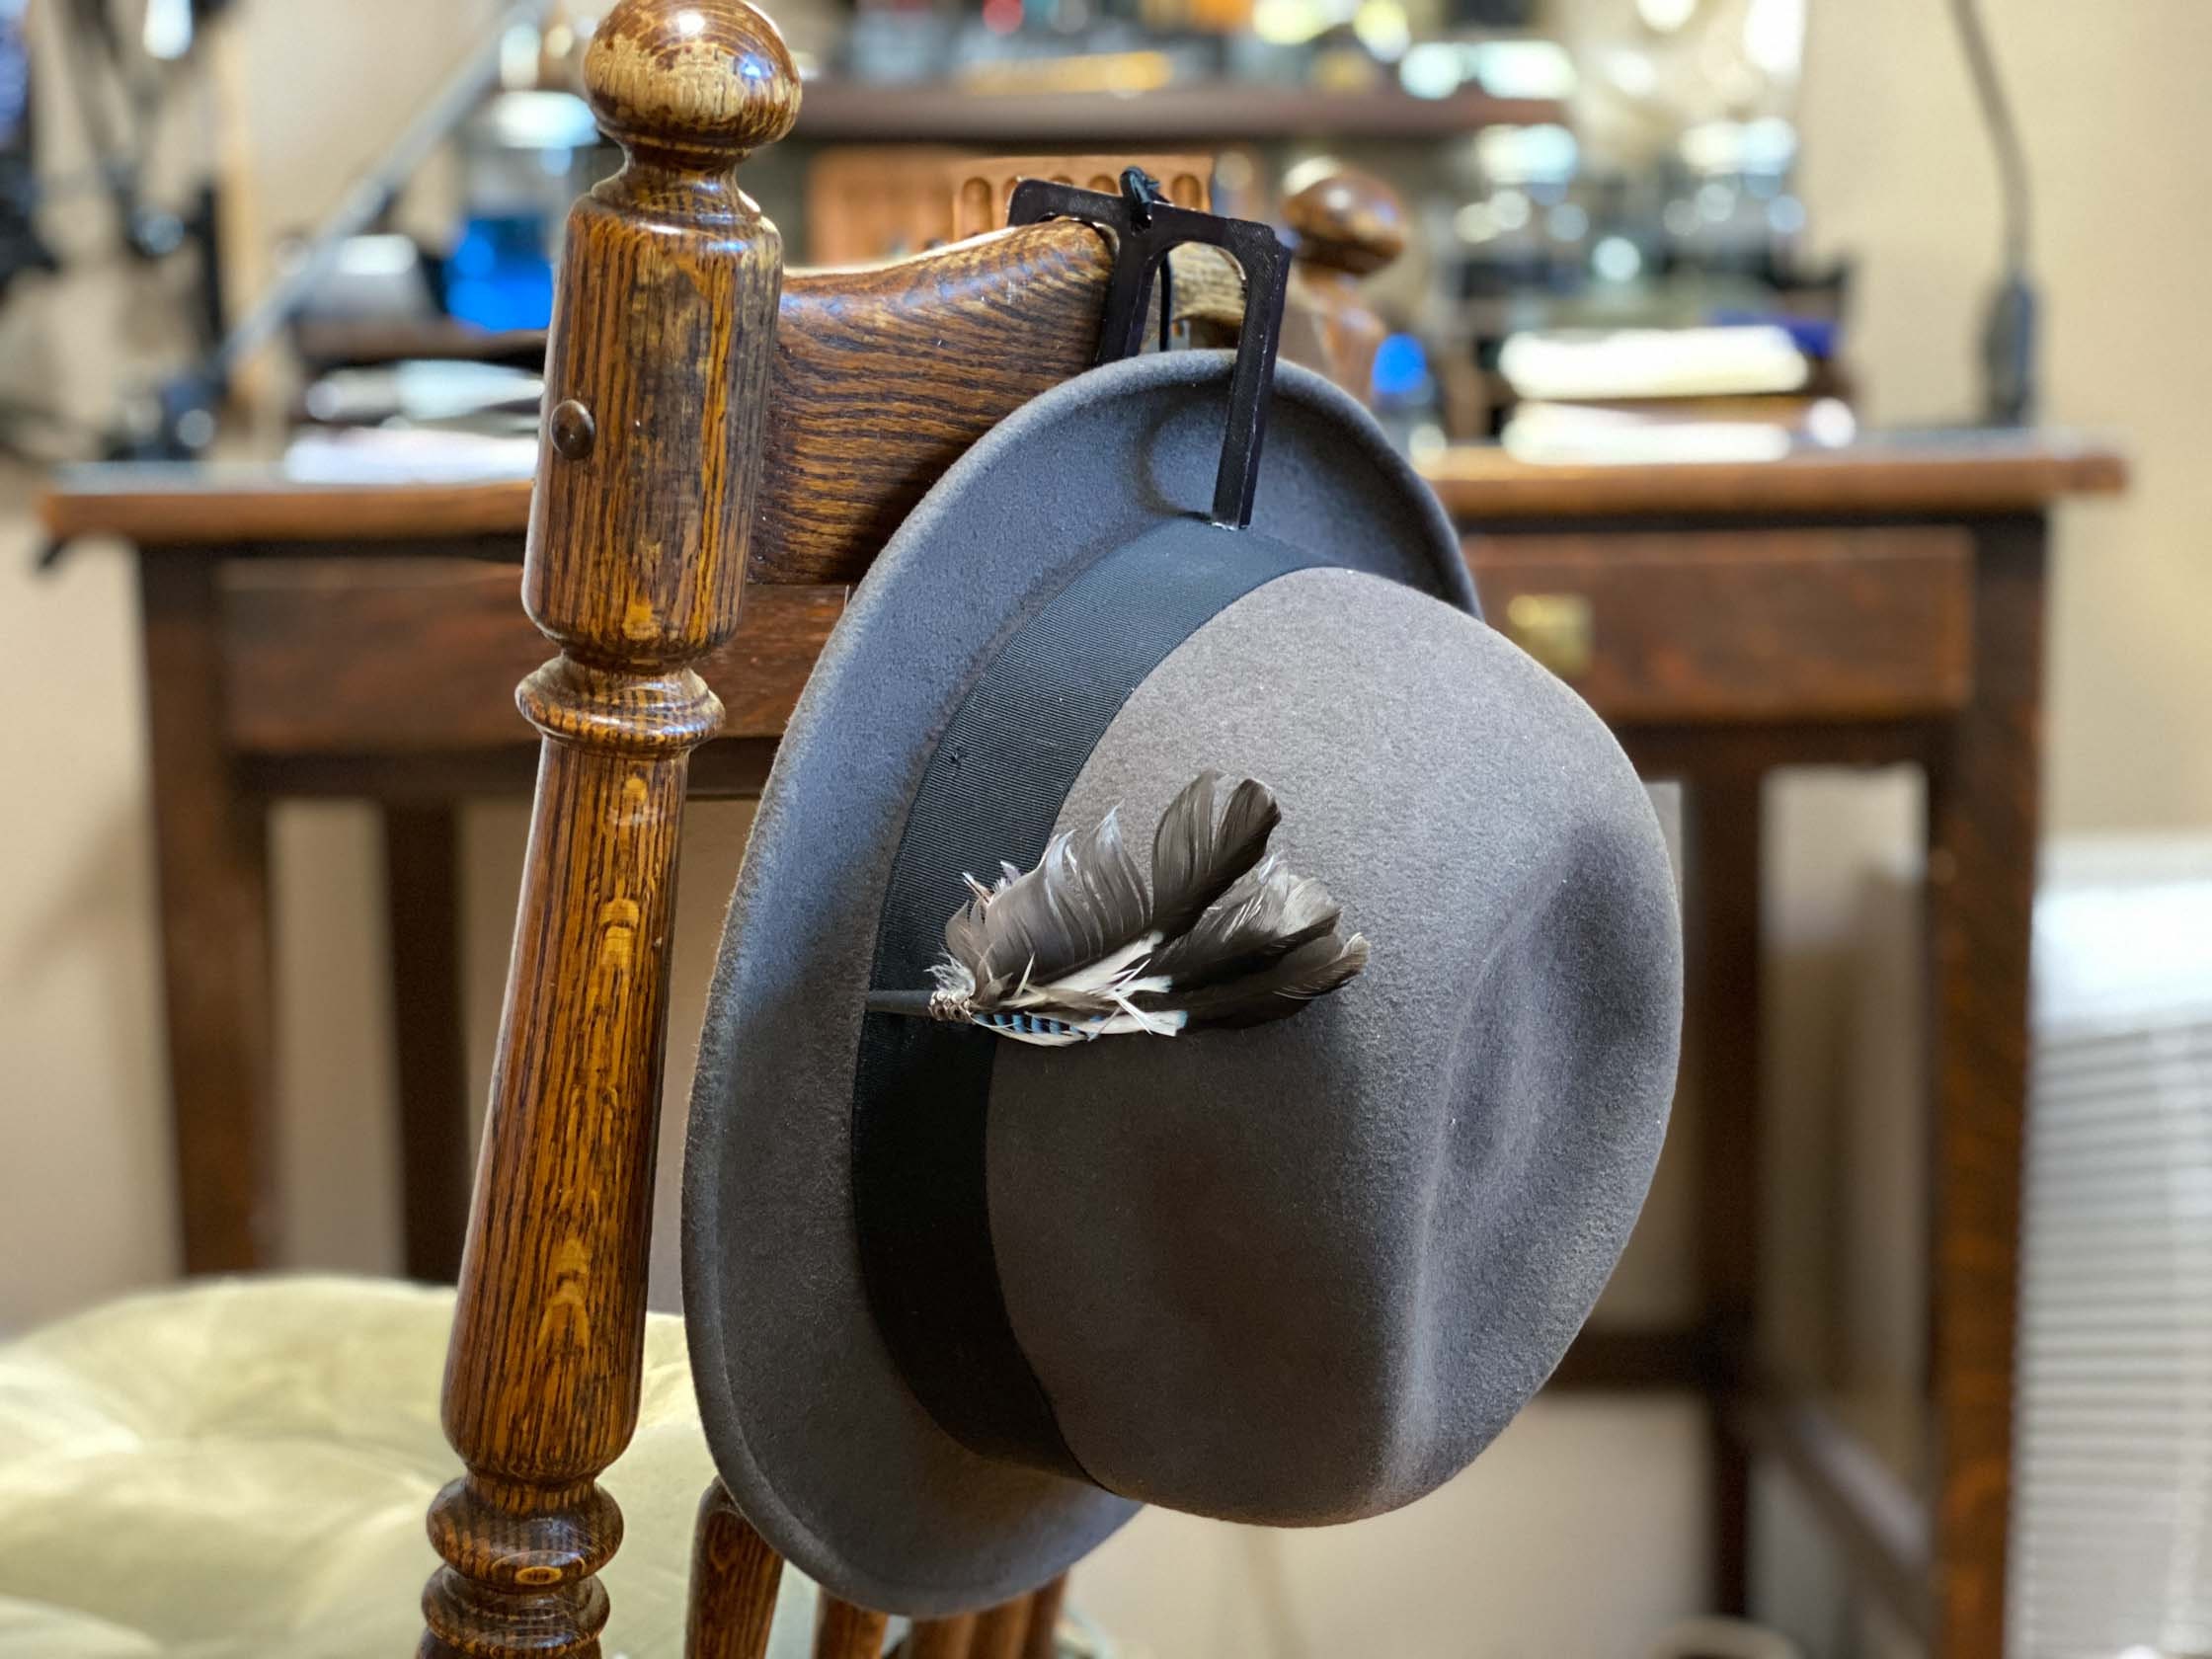 Portafedora: the Portable Hat Hook for Fedoras and Other Hats